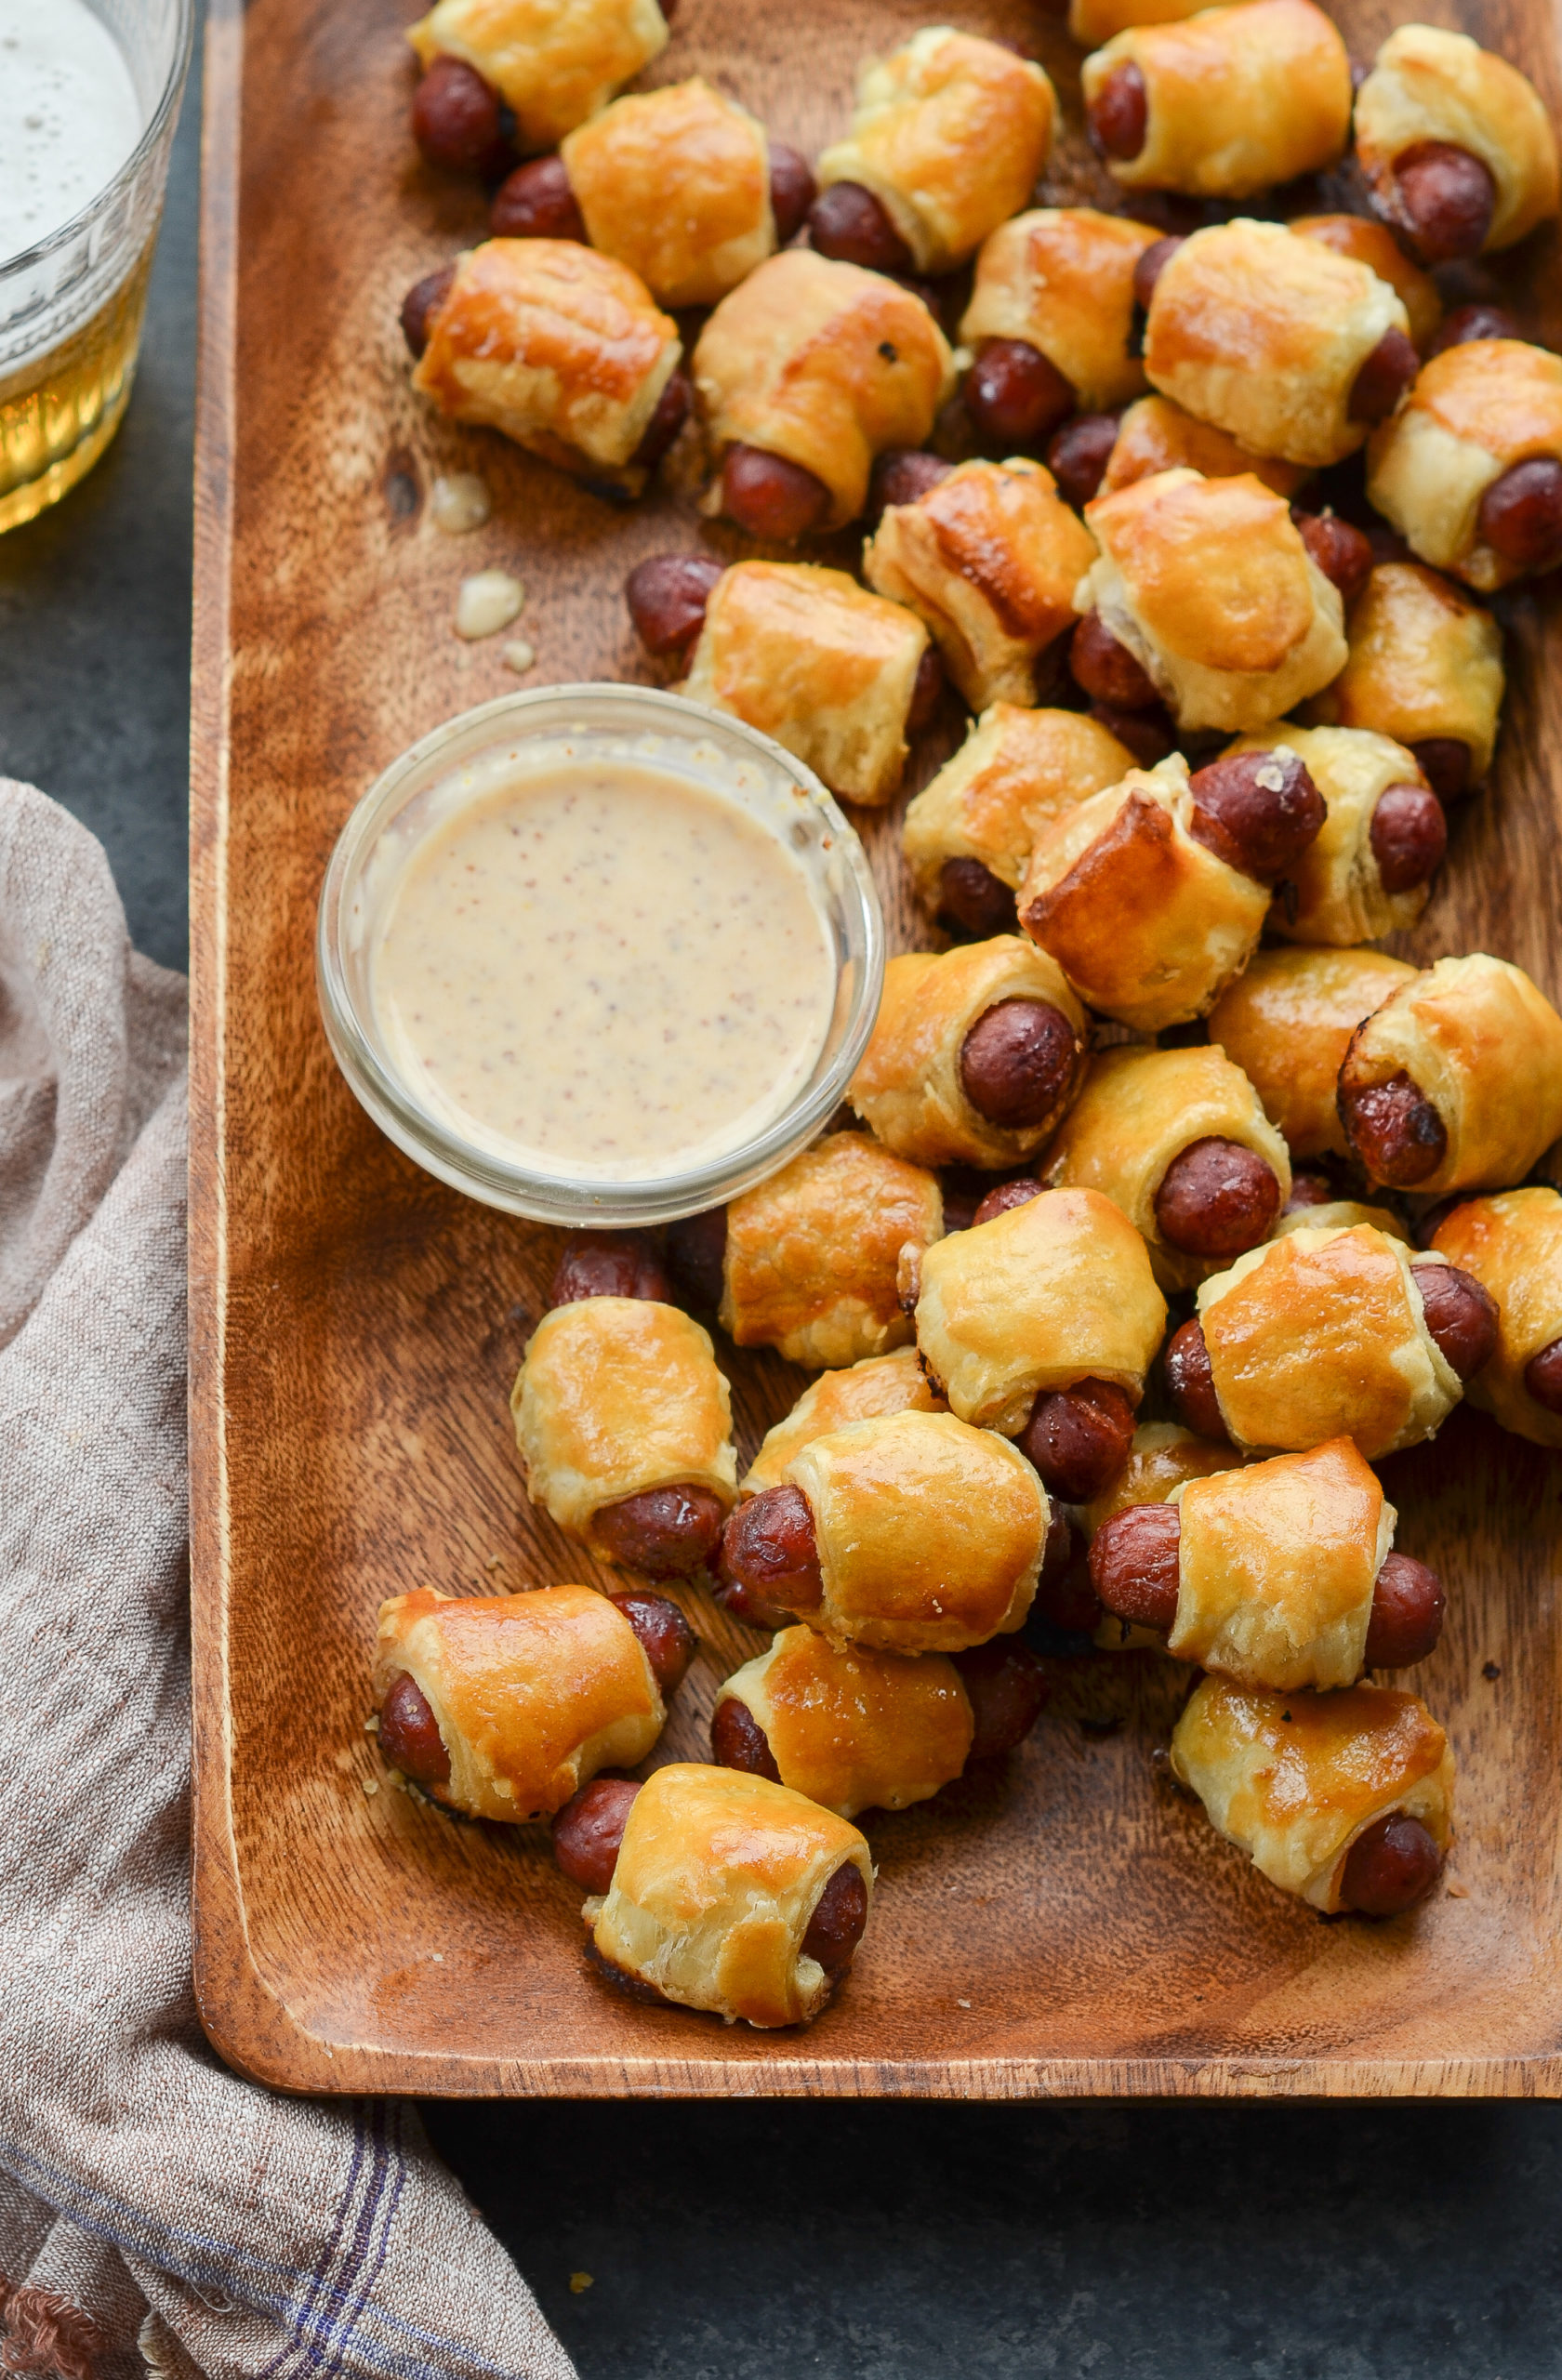 It cannot be a tailgate without some sort of Pigs in a Blanket recipe. You can opt for the traditional Pigs in a Blanket, or here are some variations to spice your tailgate appetizer spread up a bit. They're a perfect tailgate recipe that you don't need a grill for!